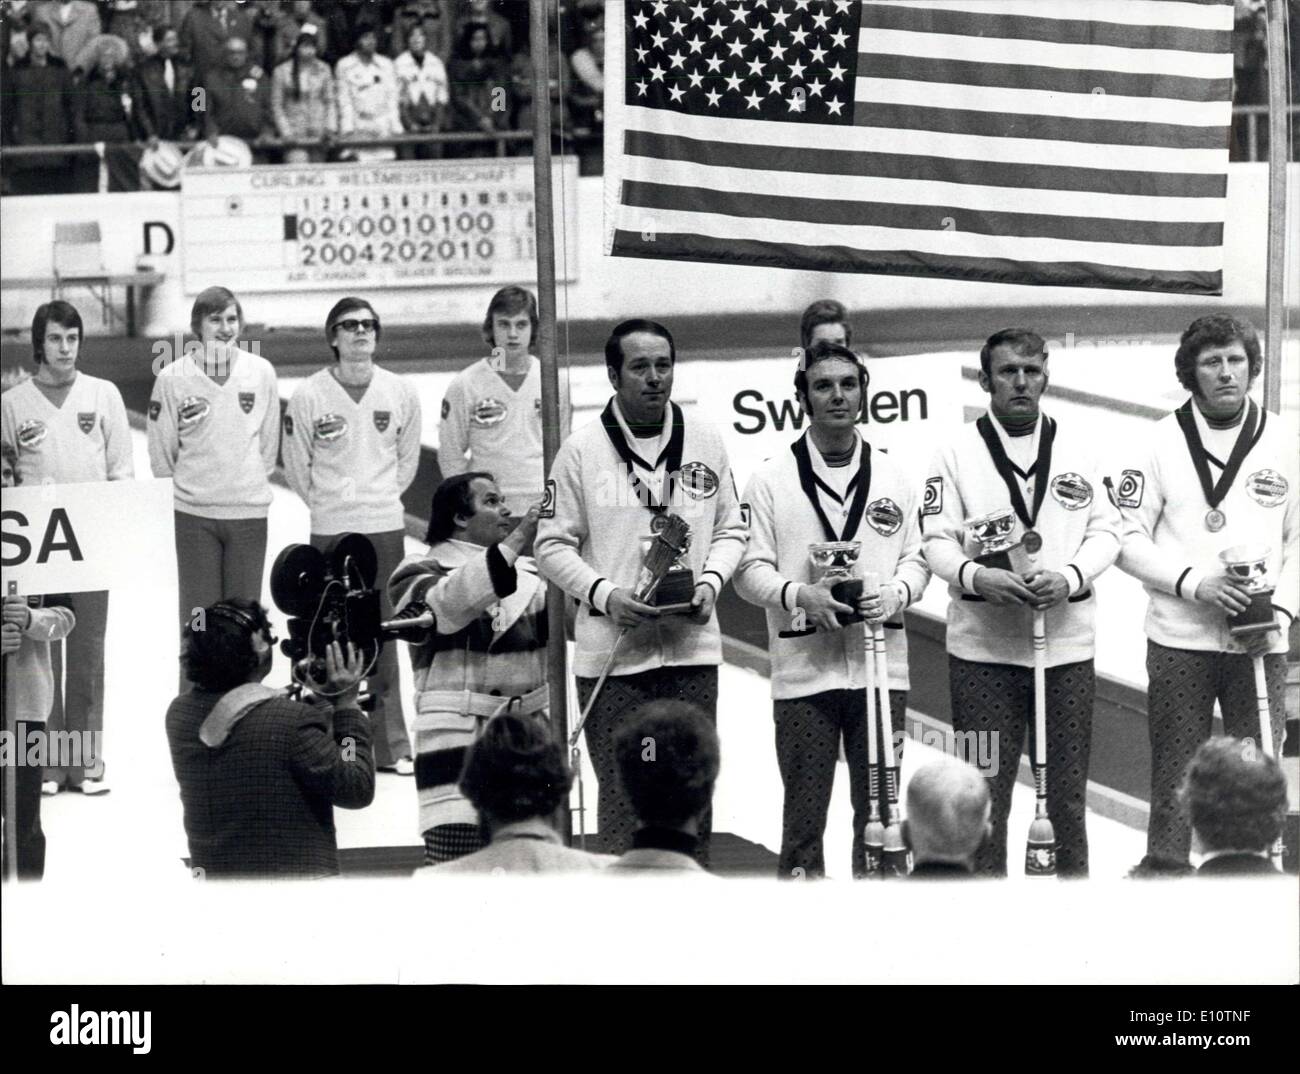 Mar. 25, 1974 - USA team with skip Summerville, Nichols, Strum and Lockner from the left won in Berne the curling world champi Stock Photo